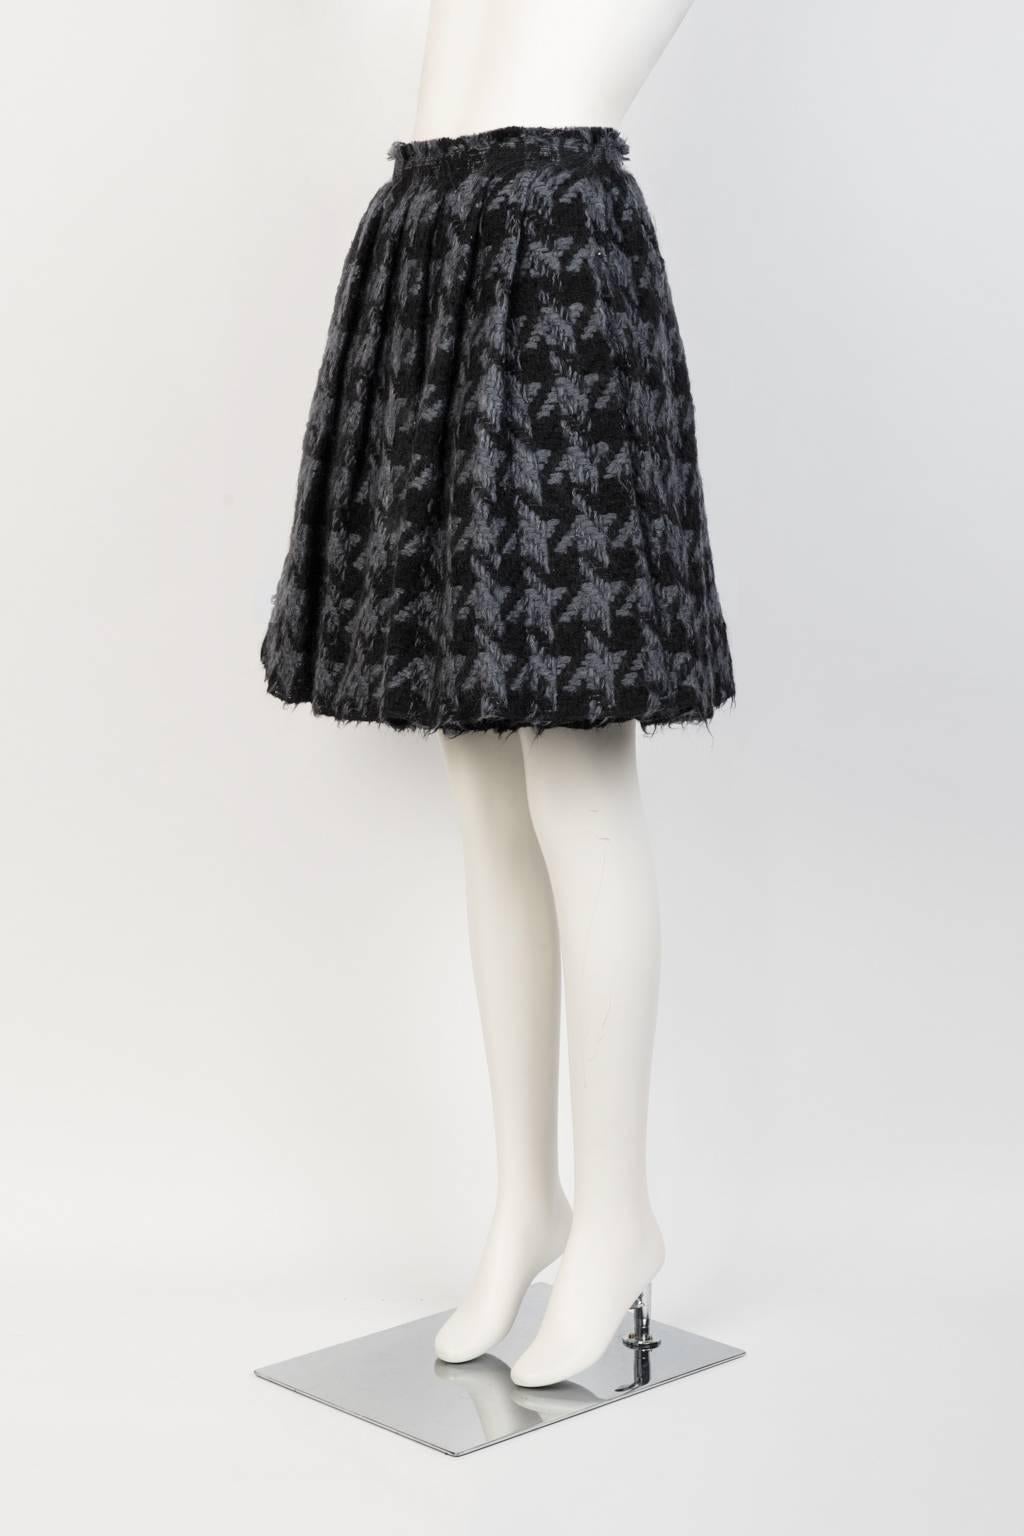 Swingy, hand pleated, over the knee skirt in grey and black houndstooth check with raw edge hem and waistband.